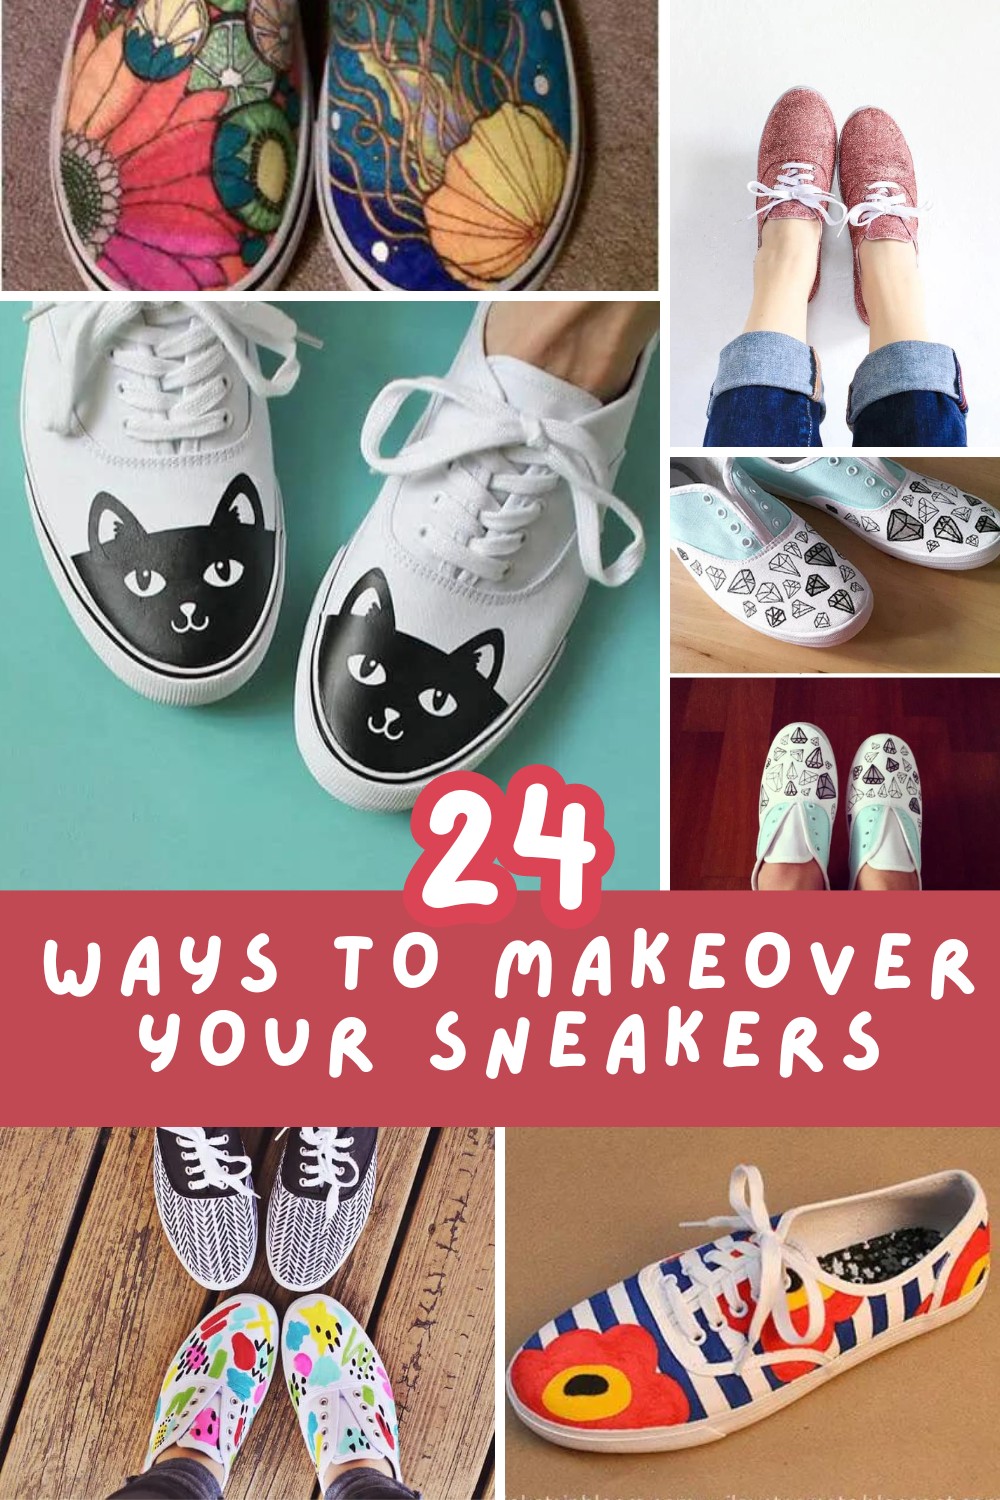 Designer footwear not in your budget? No problem! Check out these stylish and easy-to-do sneaker hacks to give your shoes a fresh, personalized touch. Let's get crafting! #SneakerDIY #FashionOnABudget